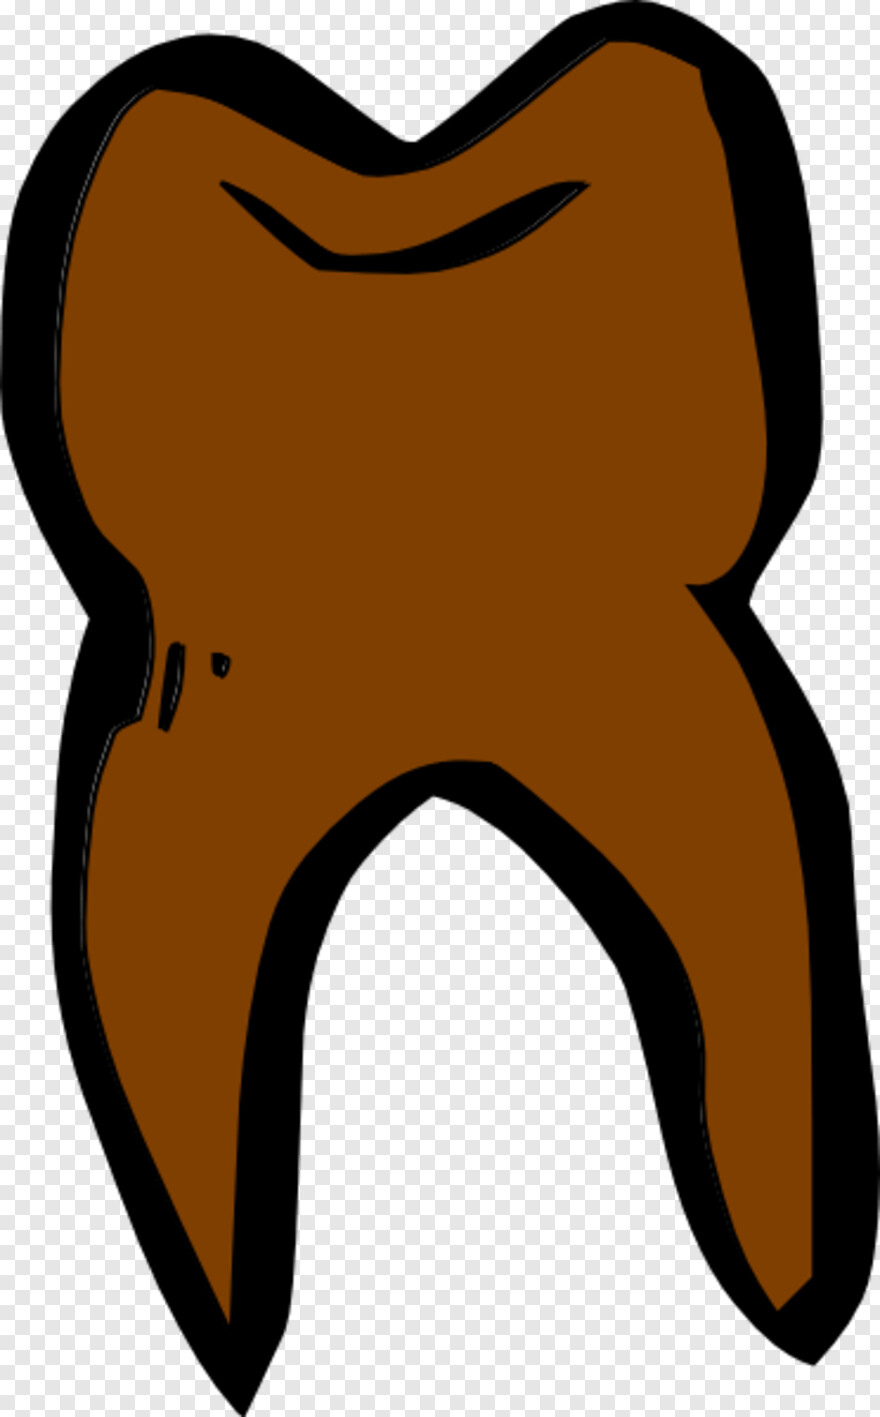 tooth-clipart # 425713